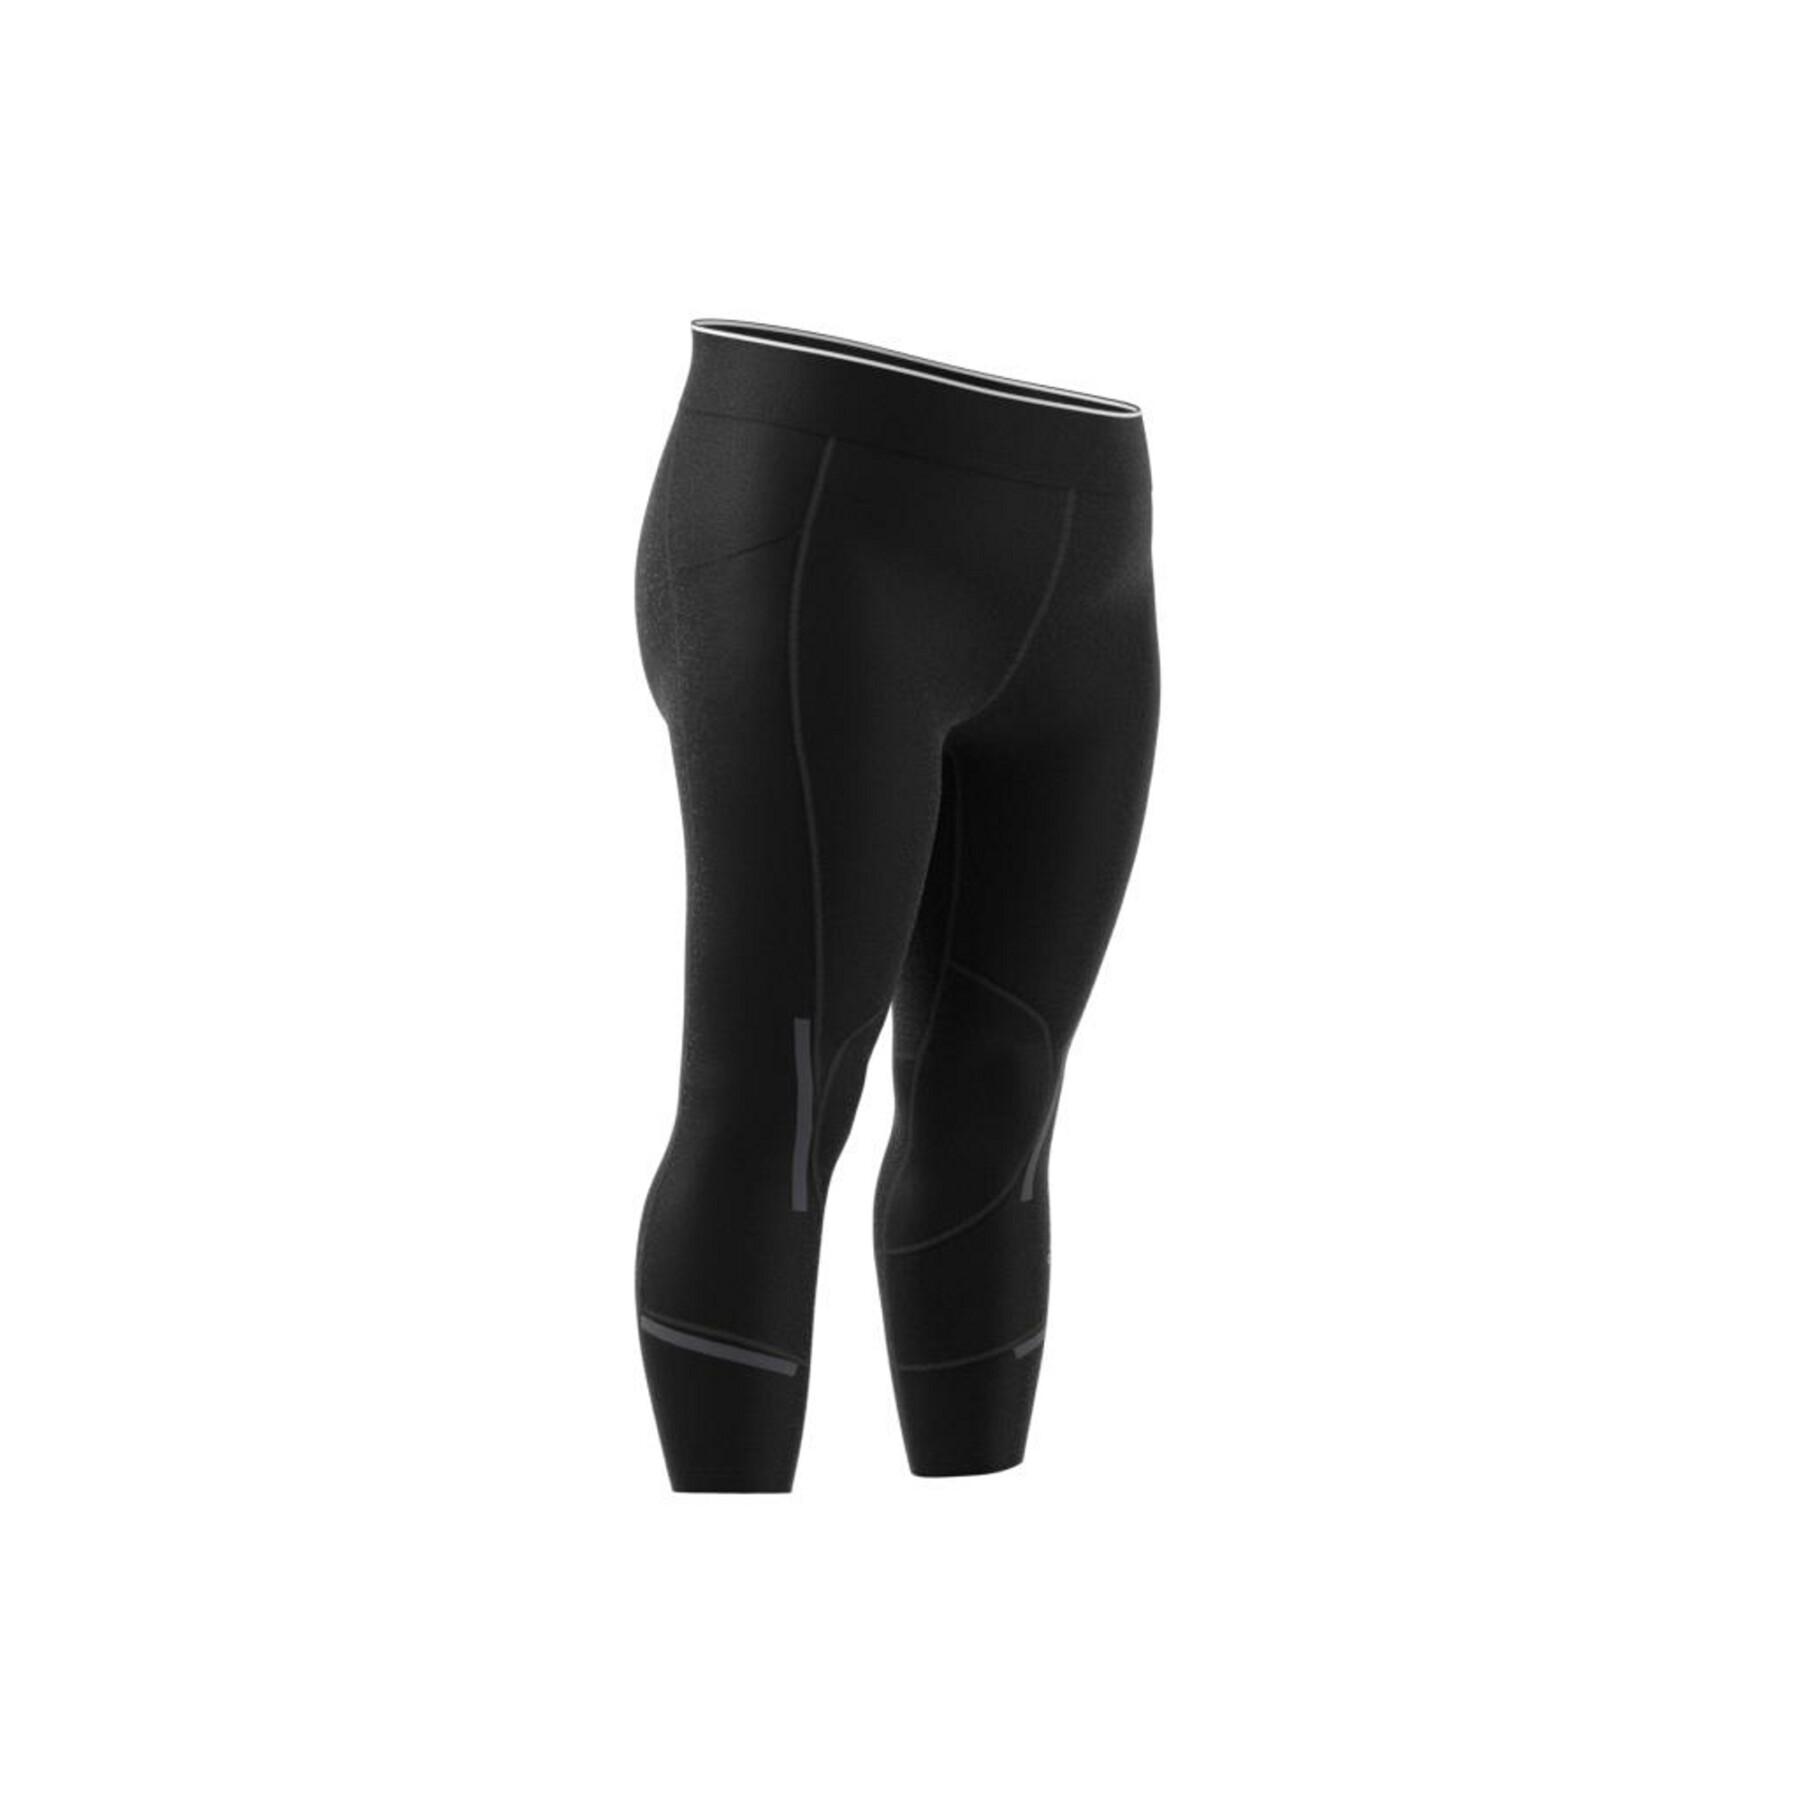 Women's tights adidas Techfit COLD.RDY Long (Plus Size)